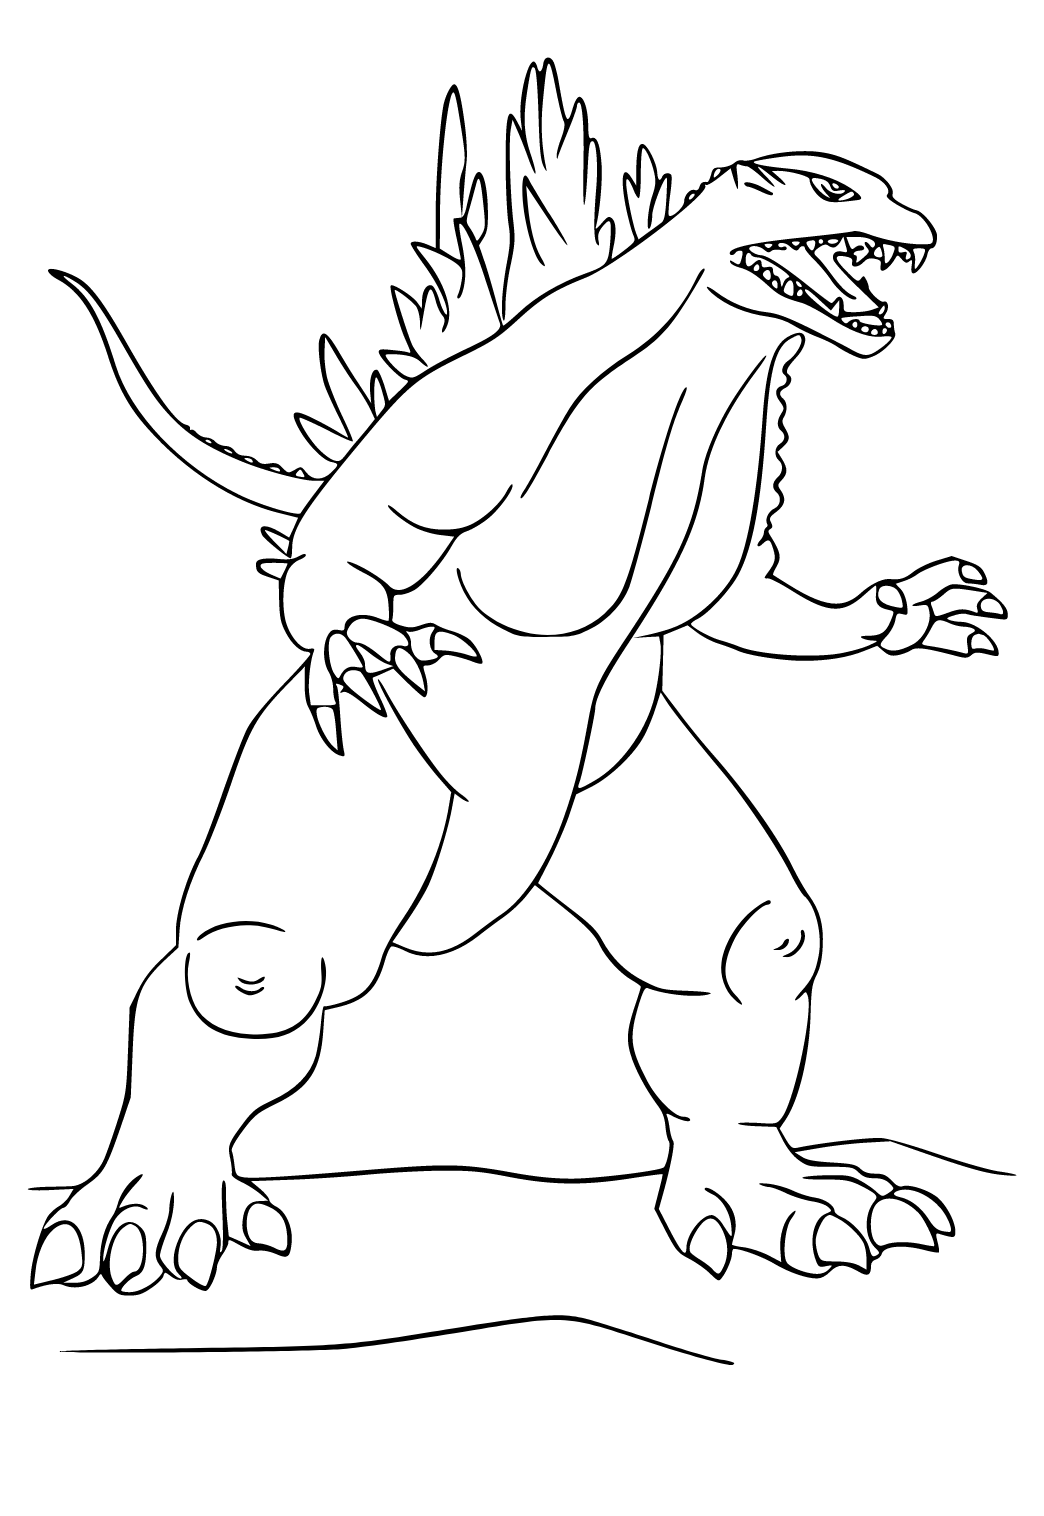 Free printable godzilla easy coloring page for adults and kids